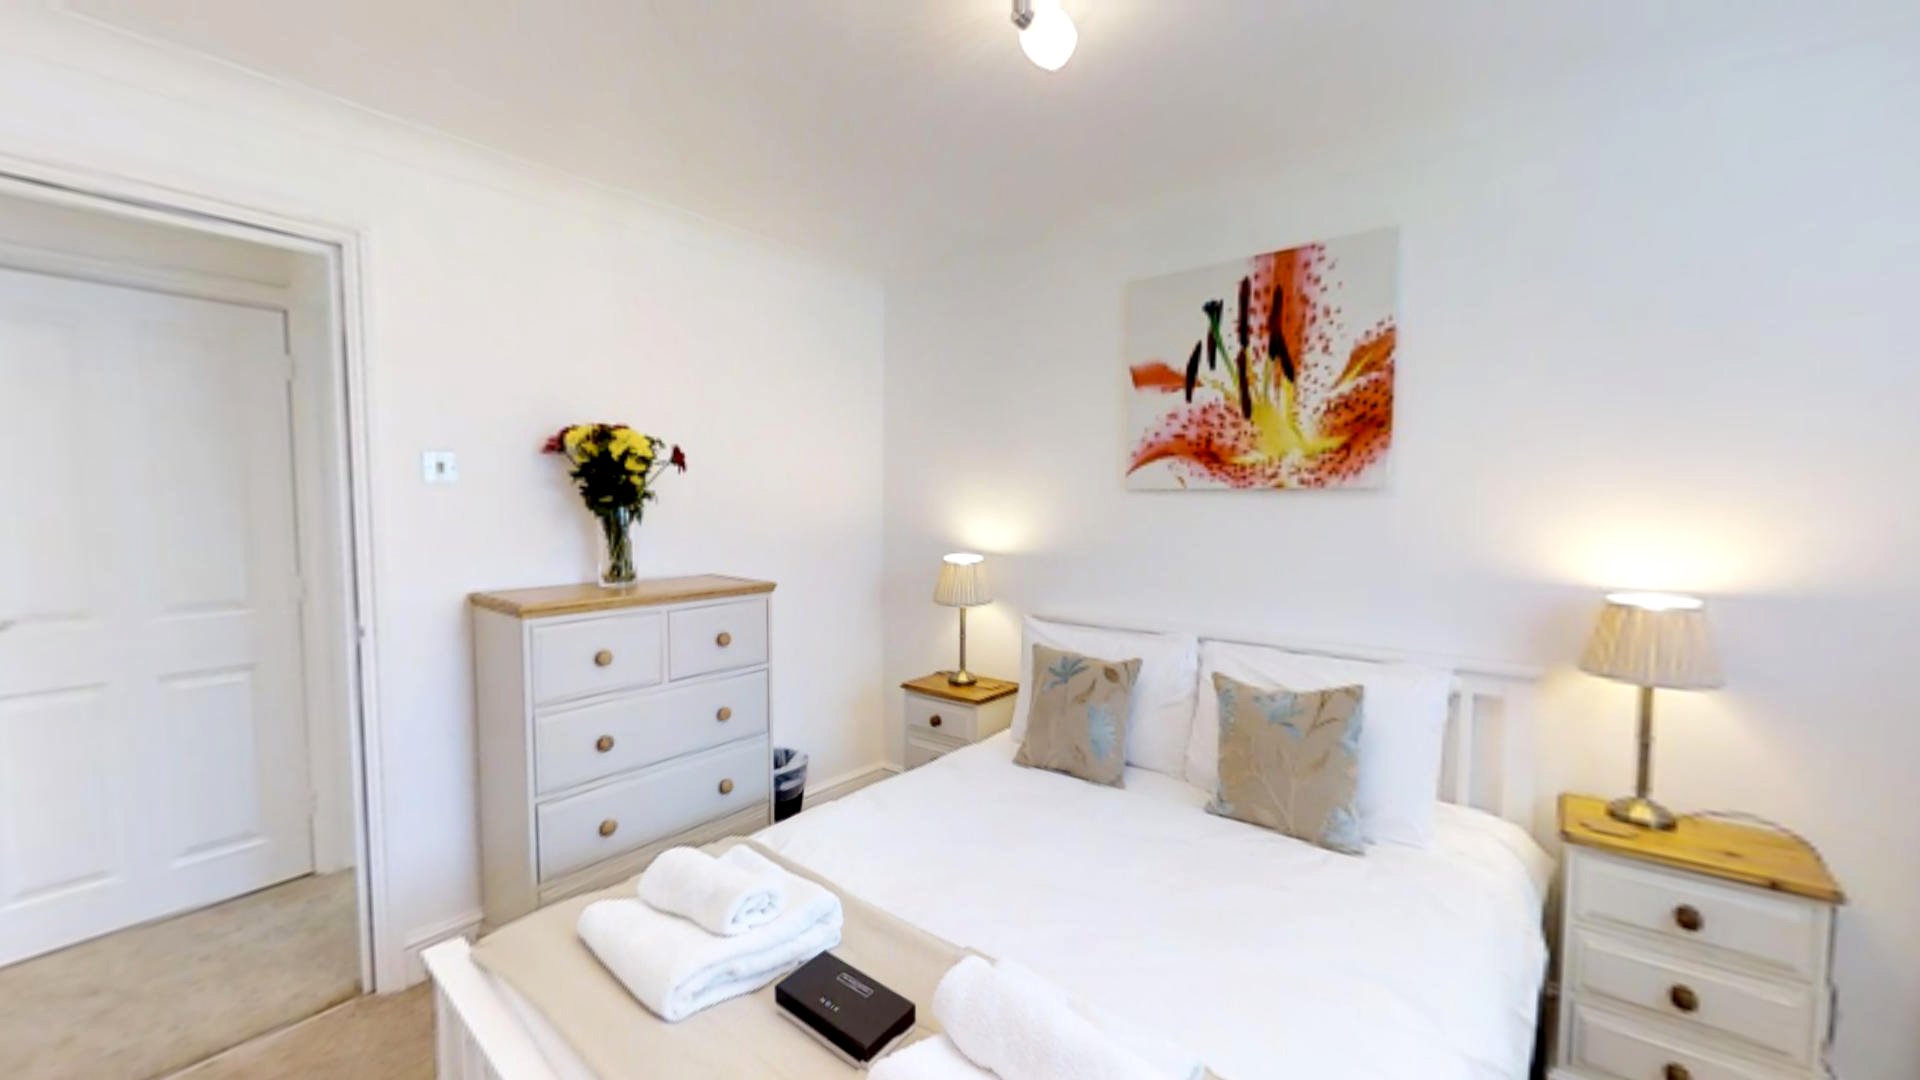 Looking-for-affordable-apartments-near-Cambridge-University?-why-not-book-our-lovely-Cambridge-University-Apartments.-Call-today-for-great-rates.